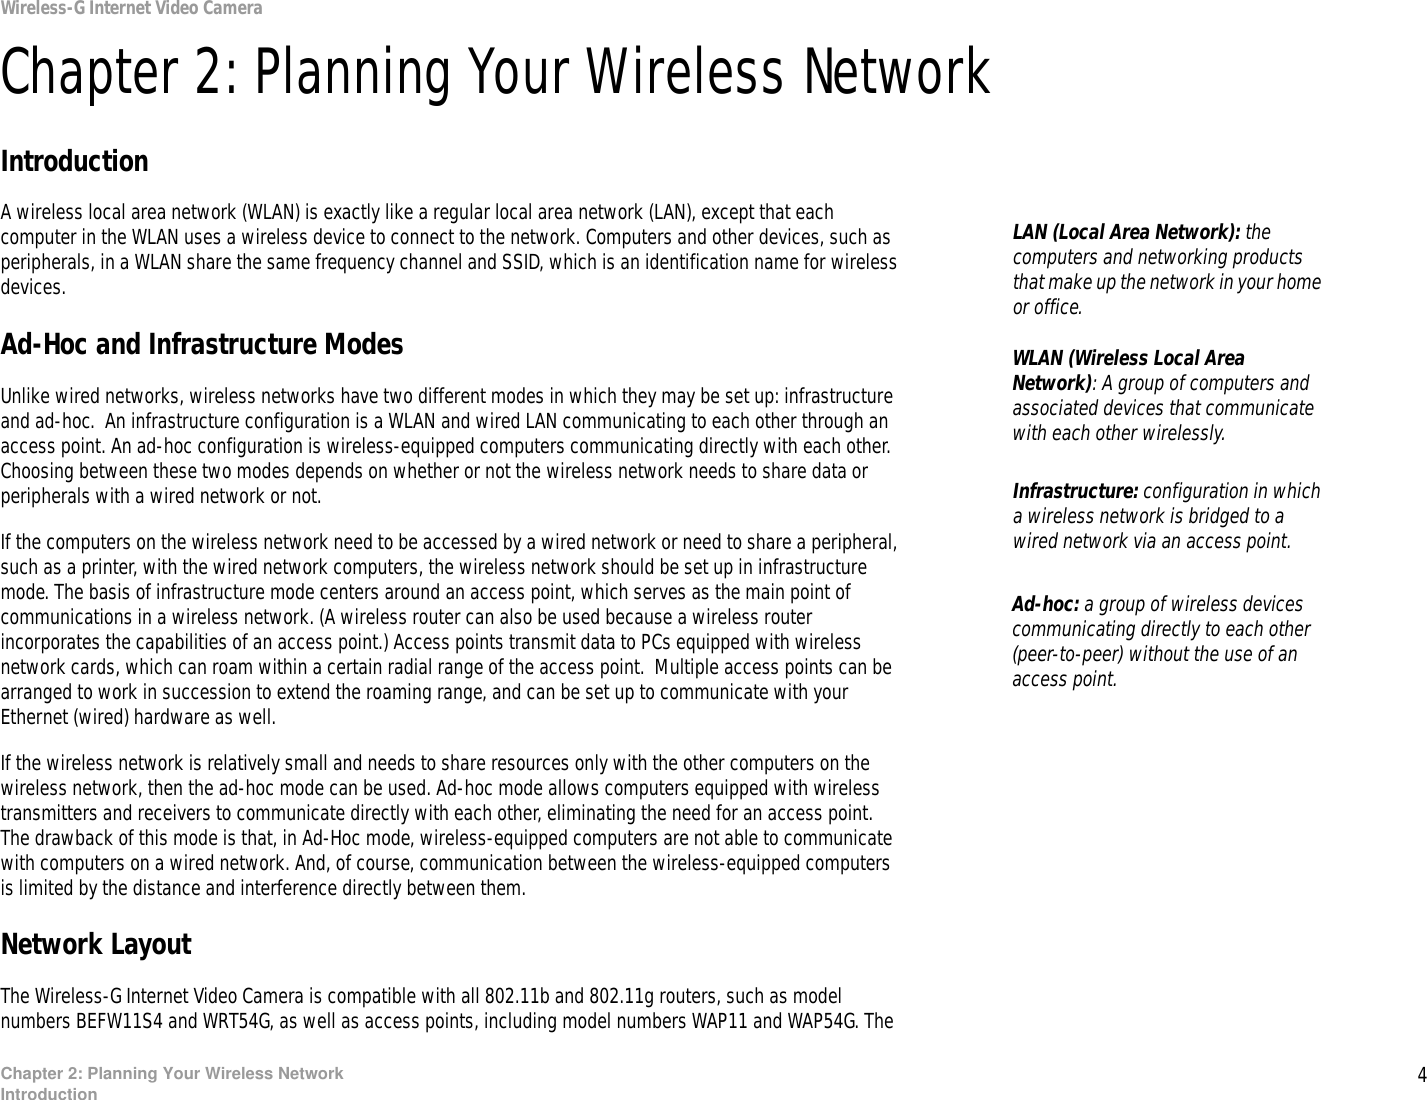 4Chapter 2: Planning Your Wireless NetworkIntroductionWireless-G Internet Video CameraChapter 2: Planning Your Wireless NetworkIntroductionA wireless local area network (WLAN) is exactly like a regular local area network (LAN), except that each computer in the WLAN uses a wireless device to connect to the network. Computers and other devices, such as peripherals, in a WLAN share the same frequency channel and SSID, which is an identification name for wireless devices.Ad-Hoc and Infrastructure ModesUnlike wired networks, wireless networks have two different modes in which they may be set up: infrastructure and ad-hoc.  An infrastructure configuration is a WLAN and wired LAN communicating to each other through an access point. An ad-hoc configuration is wireless-equipped computers communicating directly with each other. Choosing between these two modes depends on whether or not the wireless network needs to share data or peripherals with a wired network or not.If the computers on the wireless network need to be accessed by a wired network or need to share a peripheral, such as a printer, with the wired network computers, the wireless network should be set up in infrastructure mode. The basis of infrastructure mode centers around an access point, which serves as the main point of communications in a wireless network. (A wireless router can also be used because a wireless router incorporates the capabilities of an access point.) Access points transmit data to PCs equipped with wireless network cards, which can roam within a certain radial range of the access point.  Multiple access points can be arranged to work in succession to extend the roaming range, and can be set up to communicate with your Ethernet (wired) hardware as well.If the wireless network is relatively small and needs to share resources only with the other computers on the wireless network, then the ad-hoc mode can be used. Ad-hoc mode allows computers equipped with wireless transmitters and receivers to communicate directly with each other, eliminating the need for an access point.  The drawback of this mode is that, in Ad-Hoc mode, wireless-equipped computers are not able to communicate with computers on a wired network. And, of course, communication between the wireless-equipped computers is limited by the distance and interference directly between them.Network LayoutThe Wireless-G Internet Video Camera is compatible with all 802.11b and 802.11g routers, such as model numbers BEFW11S4 and WRT54G, as well as access points, including model numbers WAP11 and WAP54G. The Infrastructure: configuration in which a wireless network is bridged to a wired network via an access point.LAN (Local Area Network): the computers and networking products that make up the network in your home or office.Ad-hoc: a group of wireless devices  communicating directly to each other (peer-to-peer) without the use of an access point.WLAN (Wireless Local Area Network): A group of computers and associated devices that communicate with each other wirelessly. 